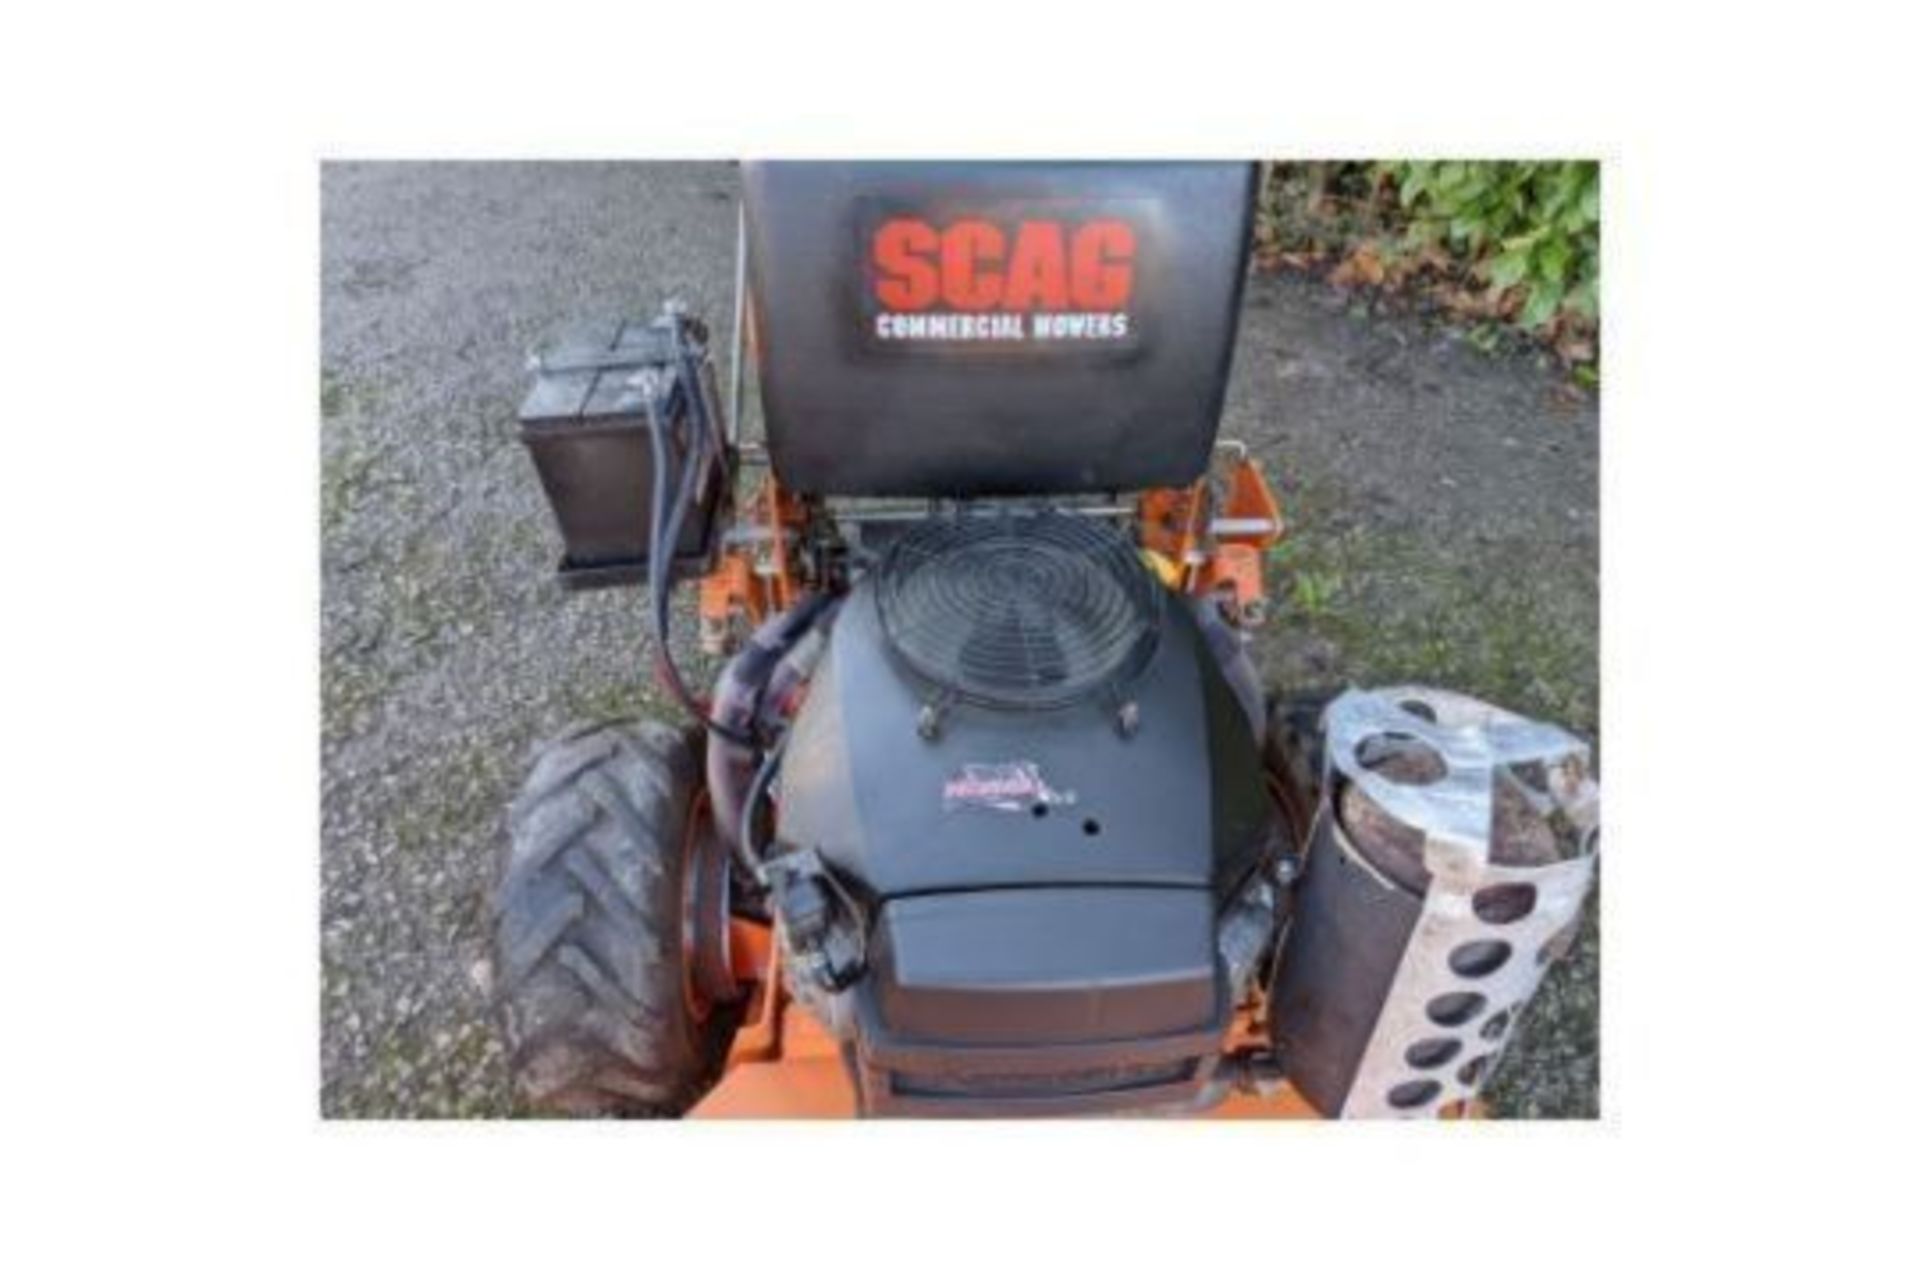 2012 Scag SWZ36A-481FS 36" Commercial Walk Behind Zero Turn Rotary Mower - Image 4 of 6